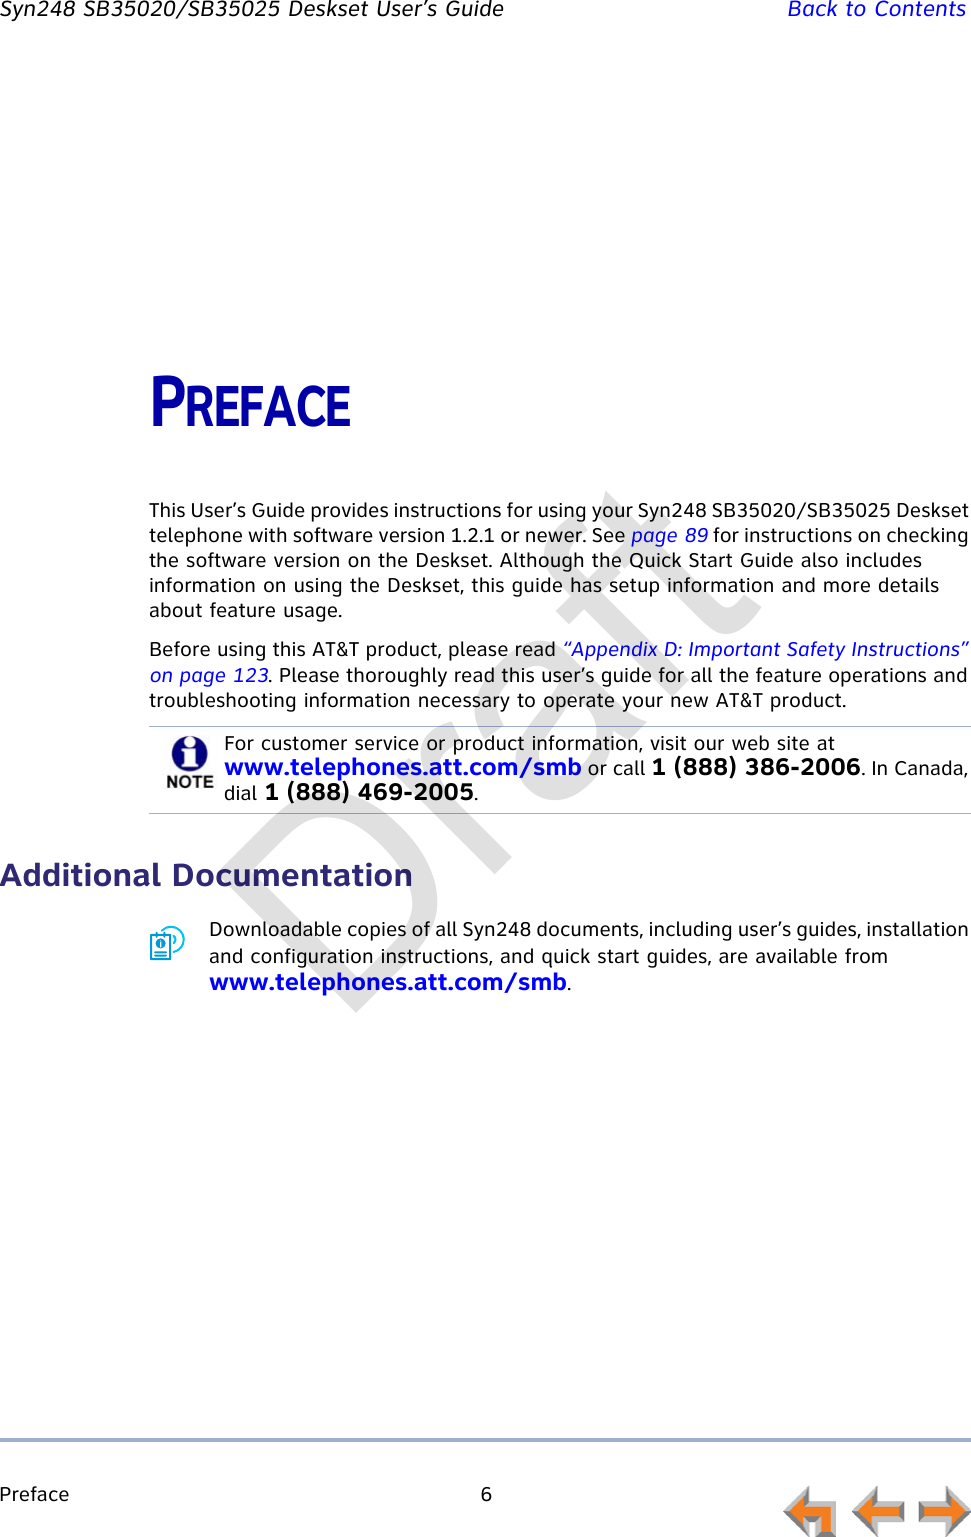 Preface 6         Syn248 SB35020/SB35025 Deskset User’s Guide Back to ContentsPREFACEThis User’s Guide provides instructions for using your Syn248 SB35020/SB35025 Deskset telephone with software version 1.2.1 or newer. See page 89 for instructions on checking the software version on the Deskset. Although the Quick Start Guide also includes information on using the Deskset, this guide has setup information and more details about feature usage.Before using this AT&amp;T product, please read “Appendix D: Important Safety Instructions” on page 123. Please thoroughly read this user’s guide for all the feature operations and troubleshooting information necessary to operate your new AT&amp;T product.Additional DocumentationDownloadable copies of all Syn248 documents, including user’s guides, installation and configuration instructions, and quick start guides, are available from www.telephones.att.com/smb.For customer service or product information, visit our web site at www.telephones.att.com/smb or call 1 (888) 386-2006. In Canada, dial 1 (888) 469-2005.Draft